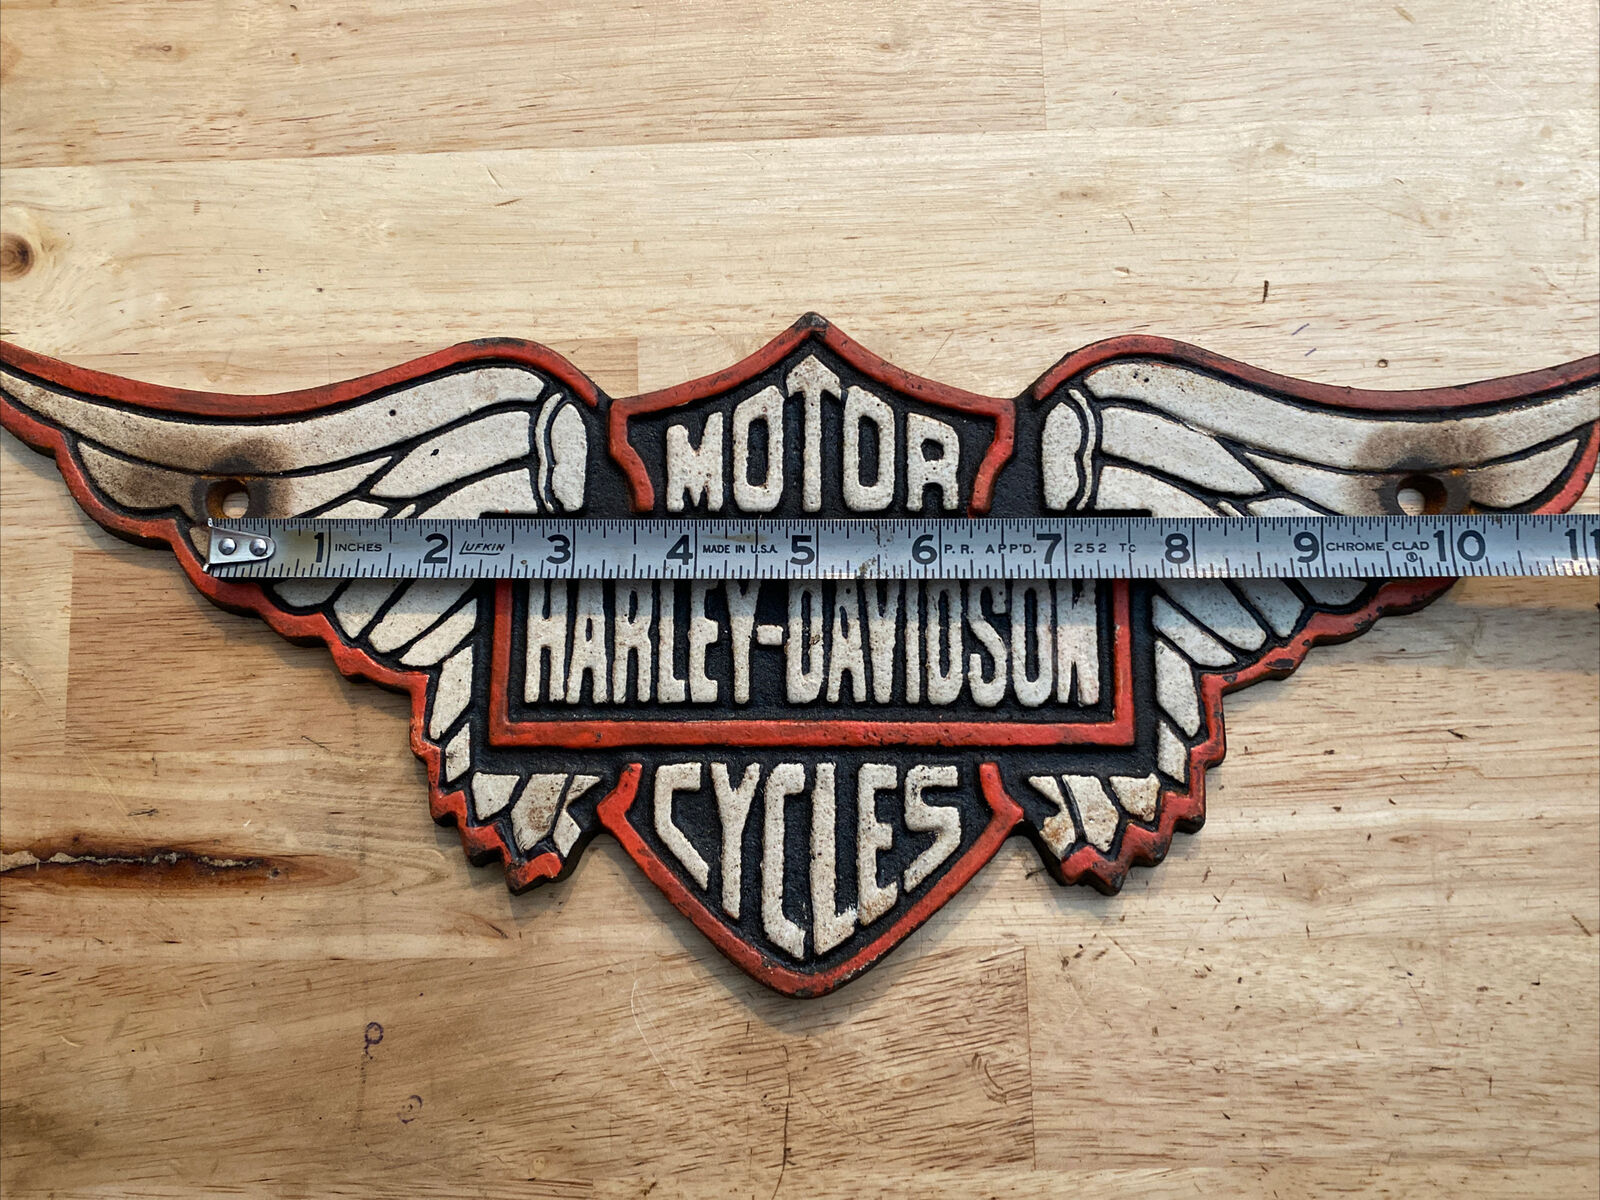 Harley Davidson Motorcycle Sign Plaque Garage Cast Iron Patina Indian Collector